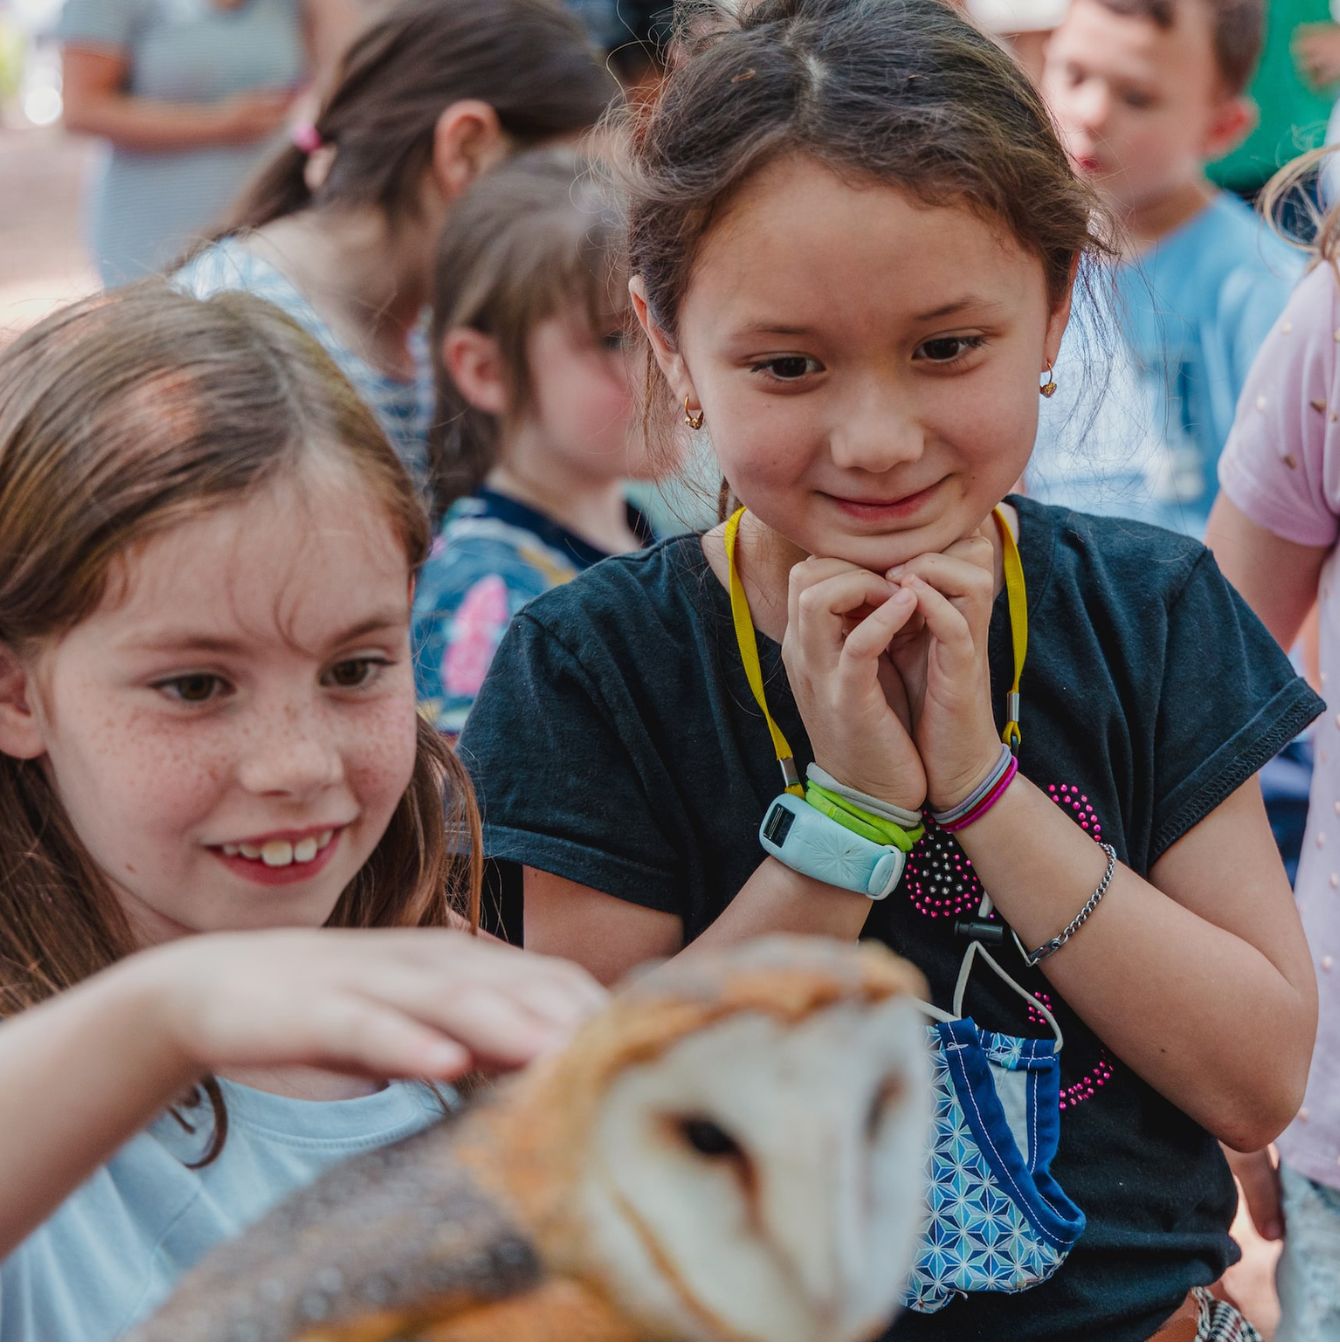 A group of young girls with excited expressions, one holding a barn owl, at an outdoor educational event.